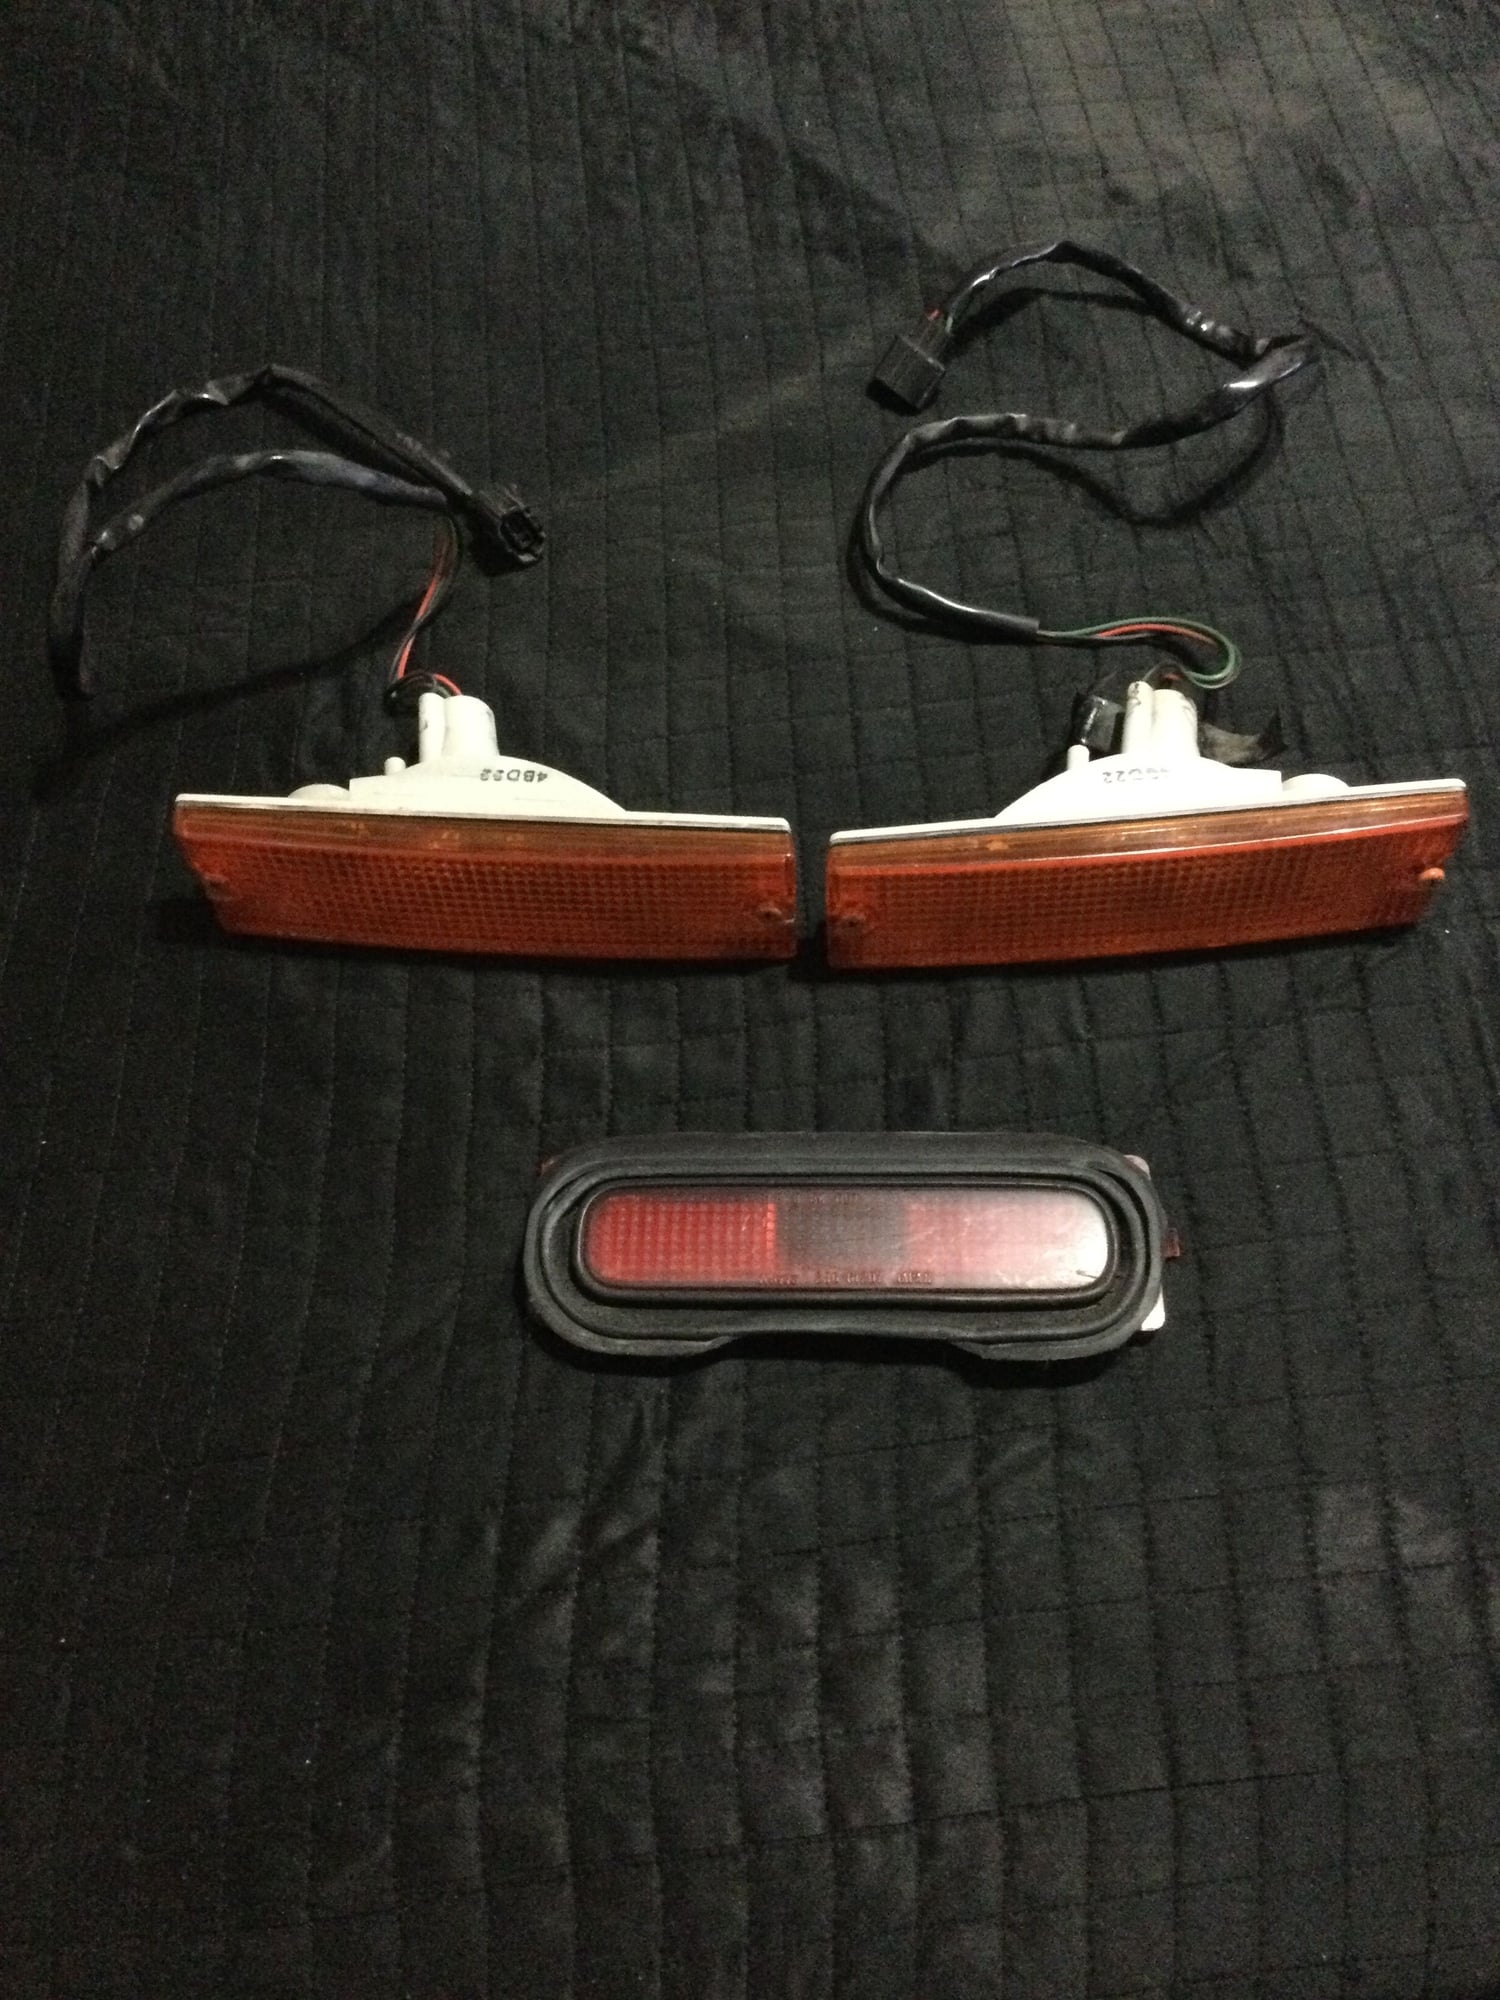 1993 Mazda RX-7 - FC S4 turn signals and third brake light lens - Accessories - $40 - Hartford, CT 06114, United States